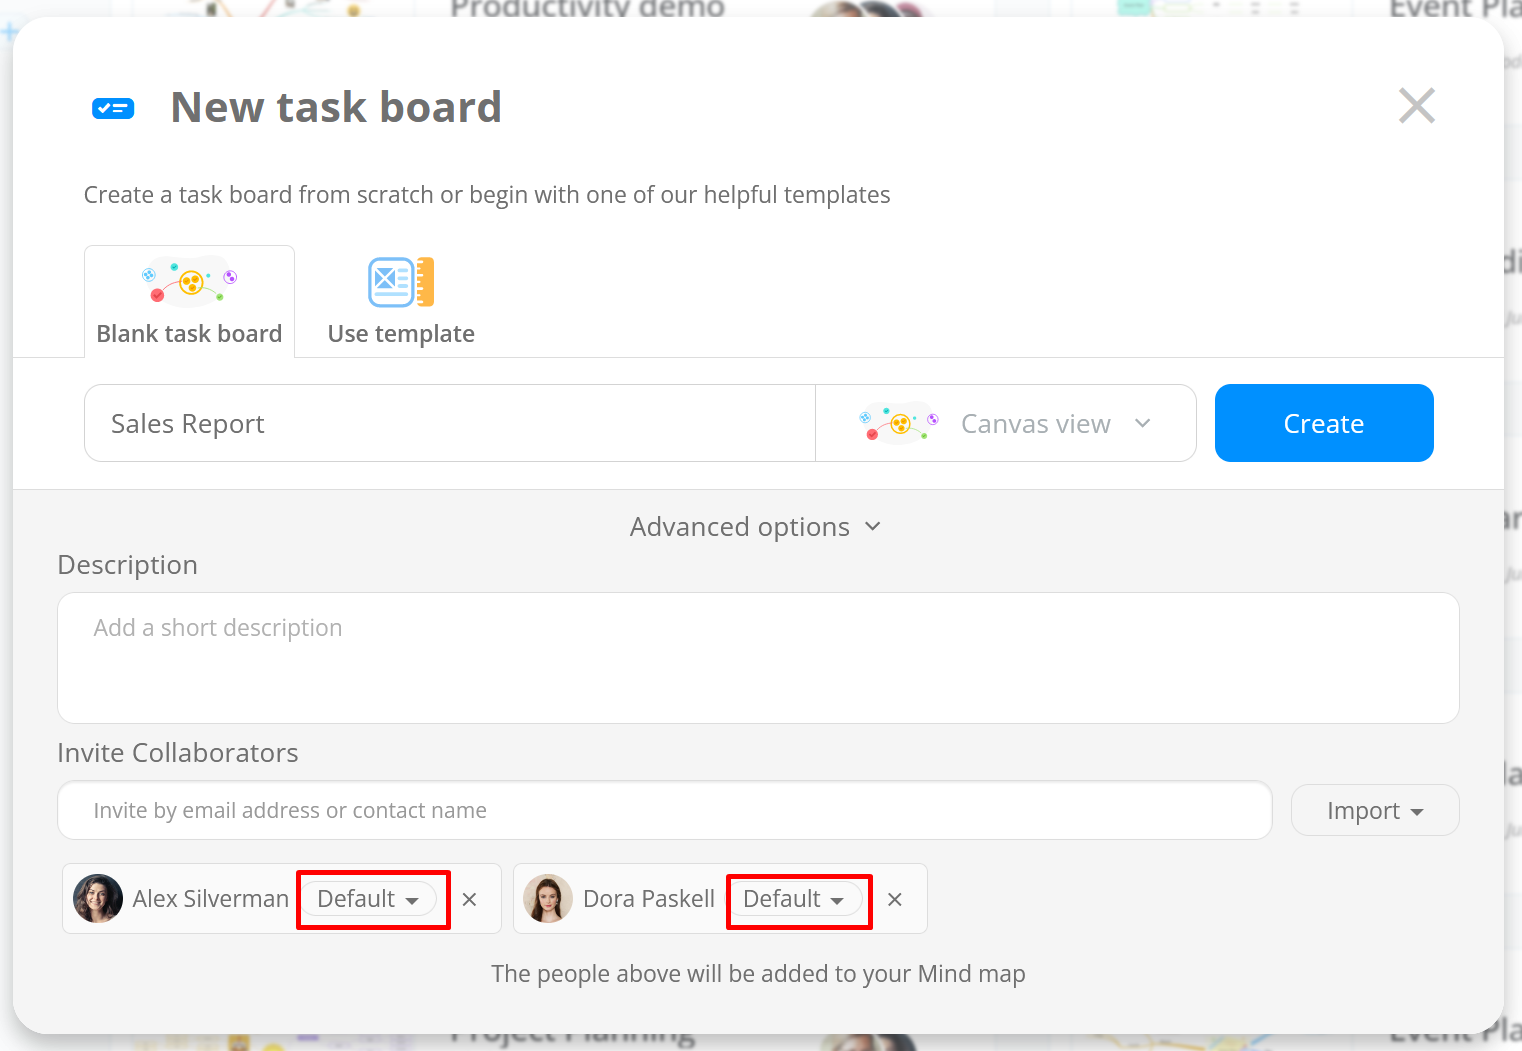 Adding users to the task board.